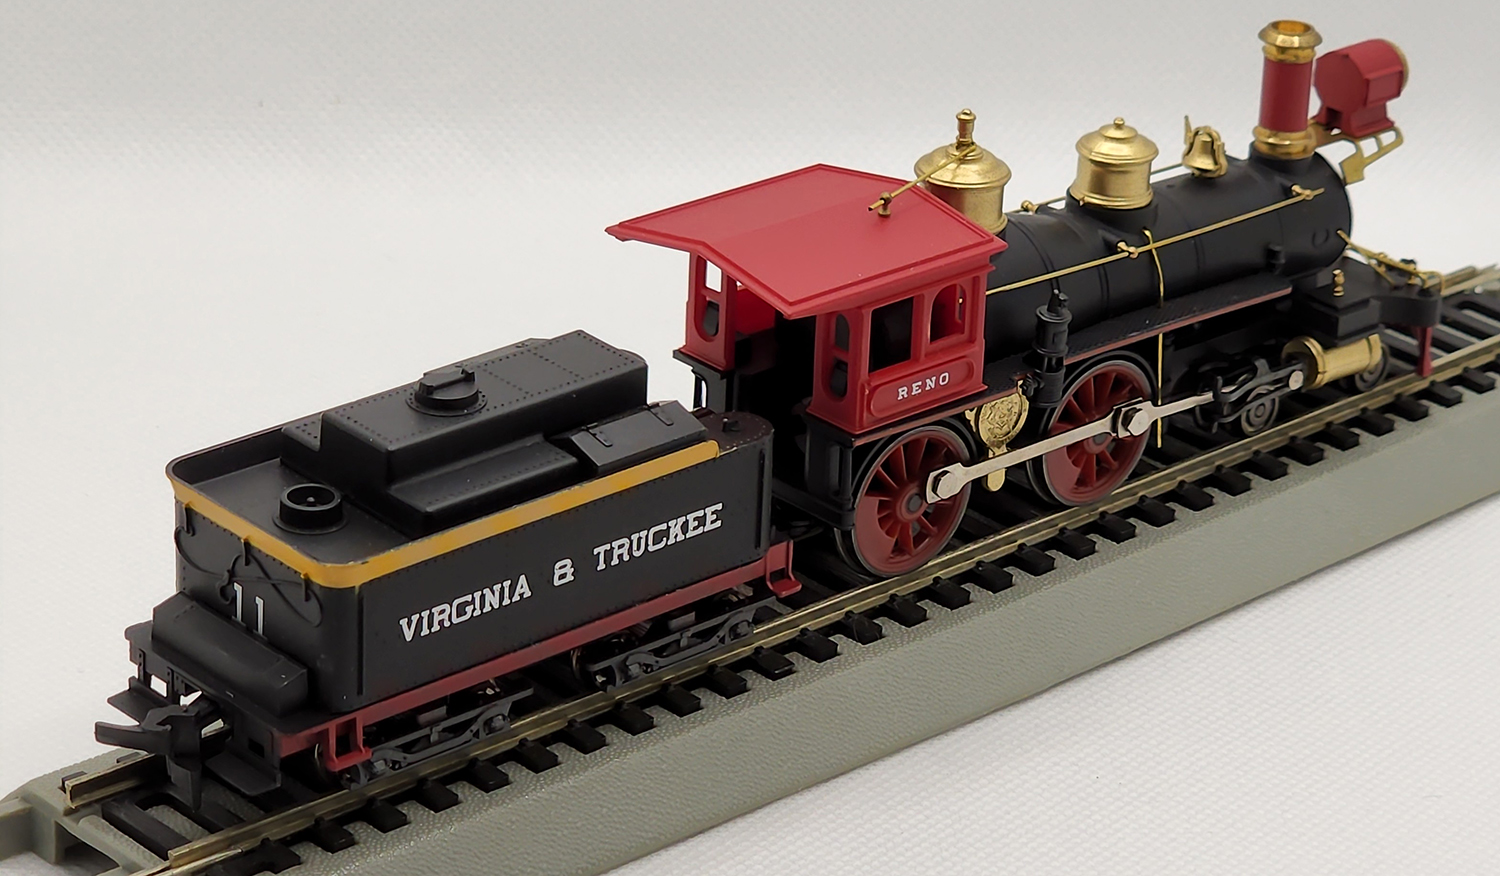 6th view of the Rivarossi Virginia & Truckee Steam Locomotive #5418 4-4-0 Reno in my HO-scale Collection